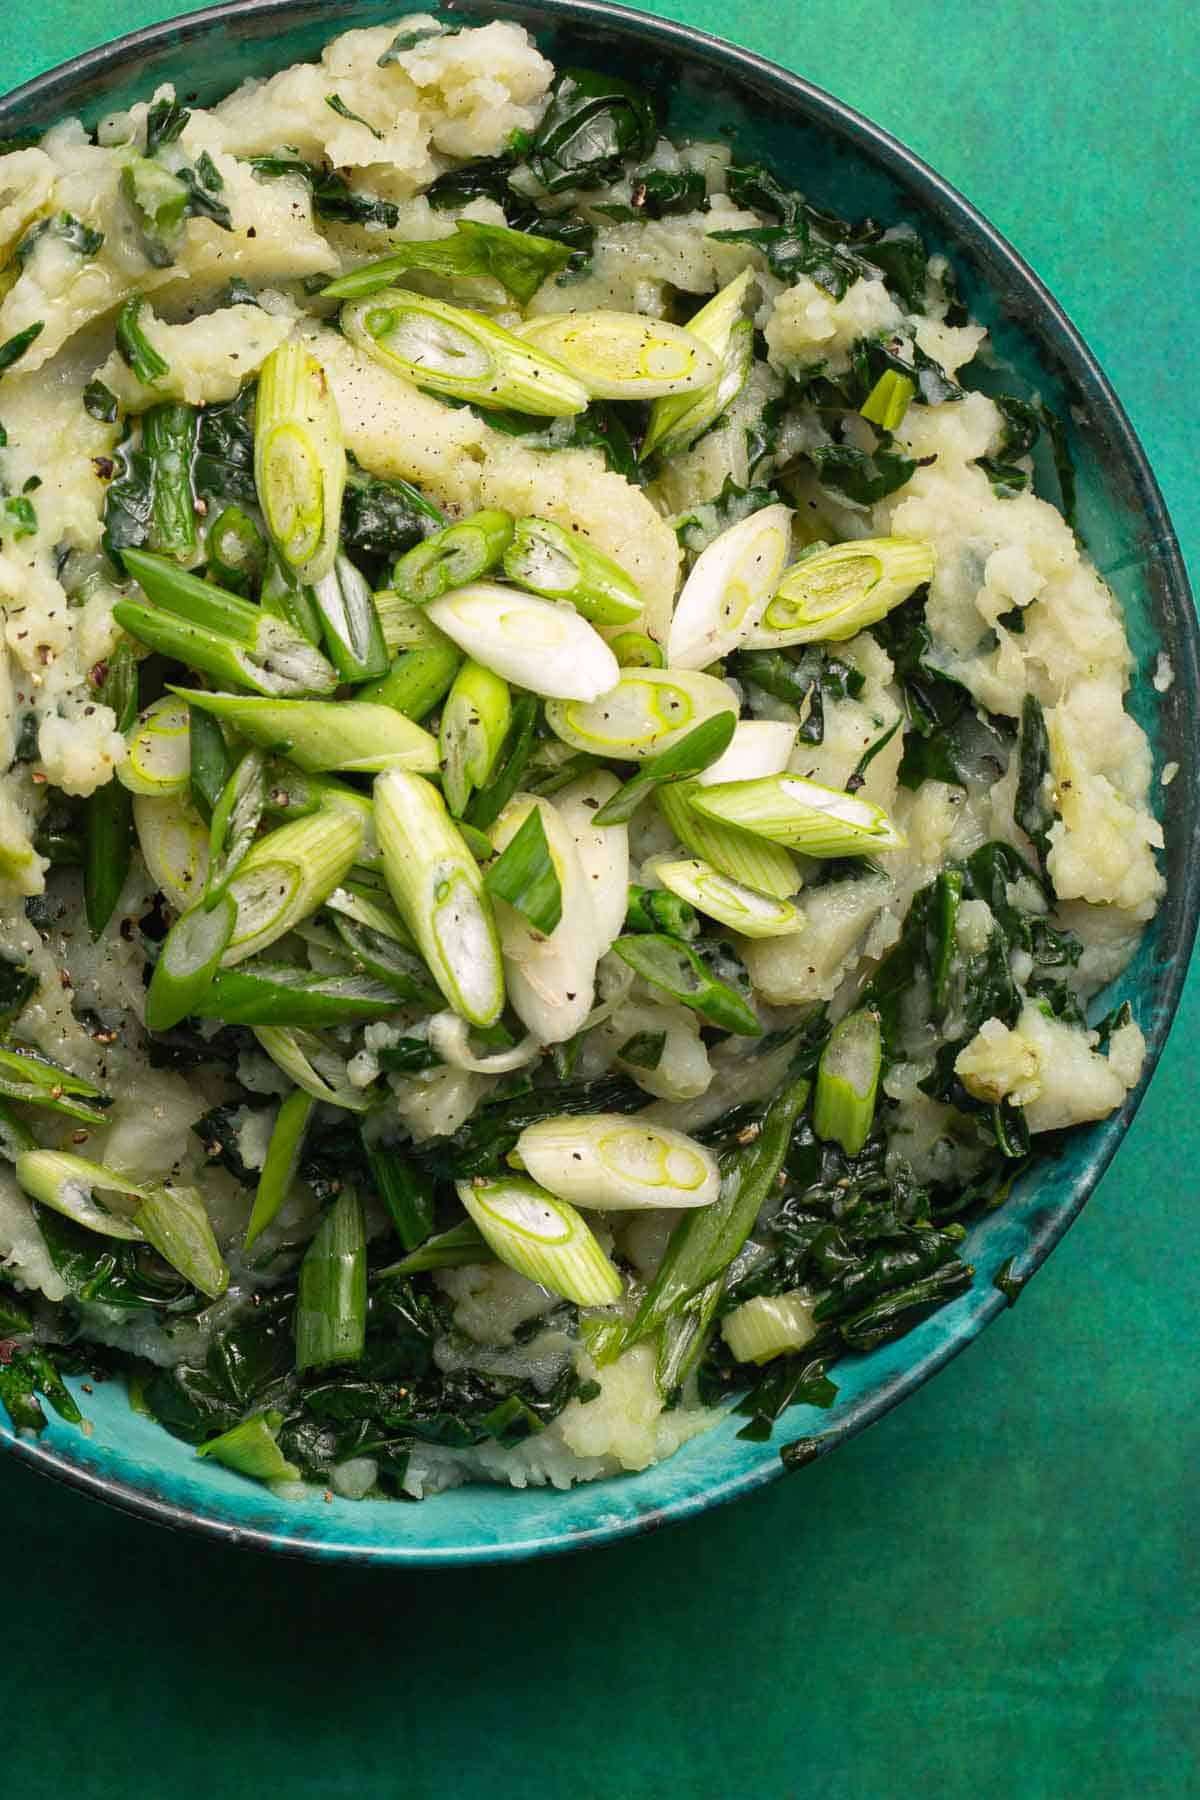 A bowl of greens and potatoes mixed together.